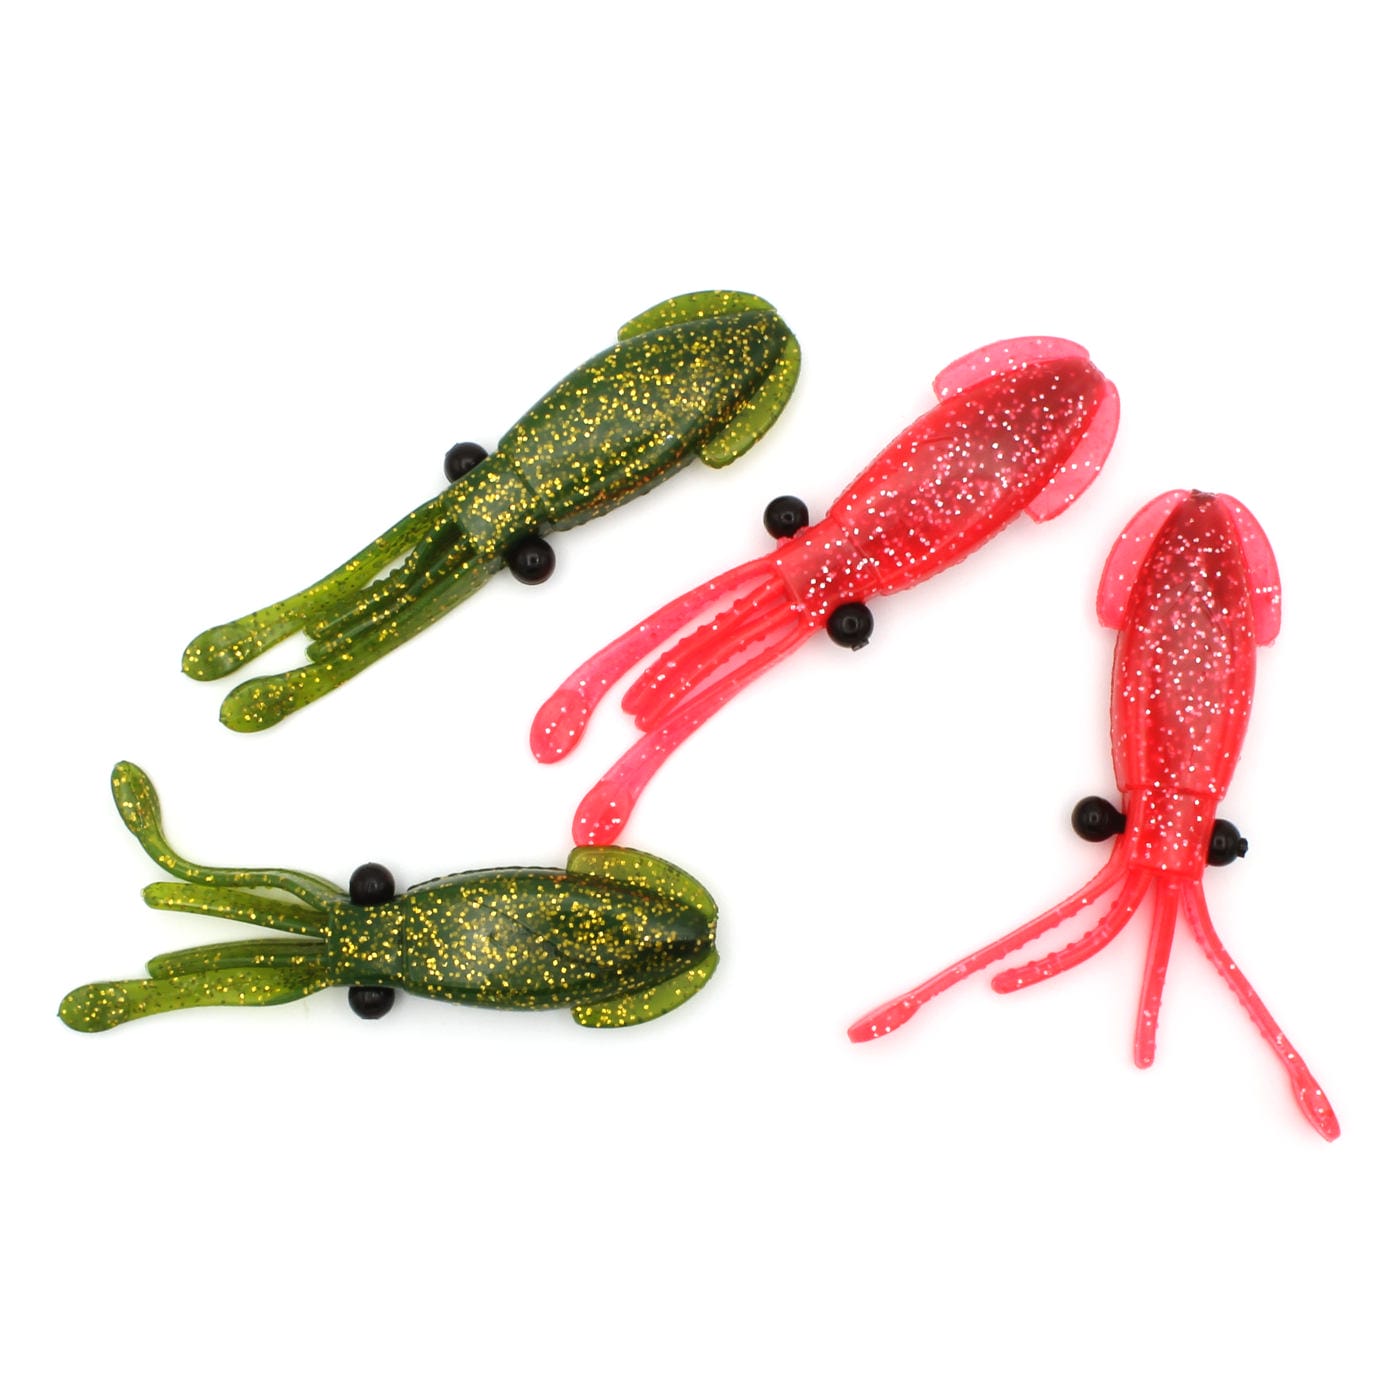 Cheap Nikko Soft Lure Dappy Firefly Squid Scented 3 Inch 2/Pack